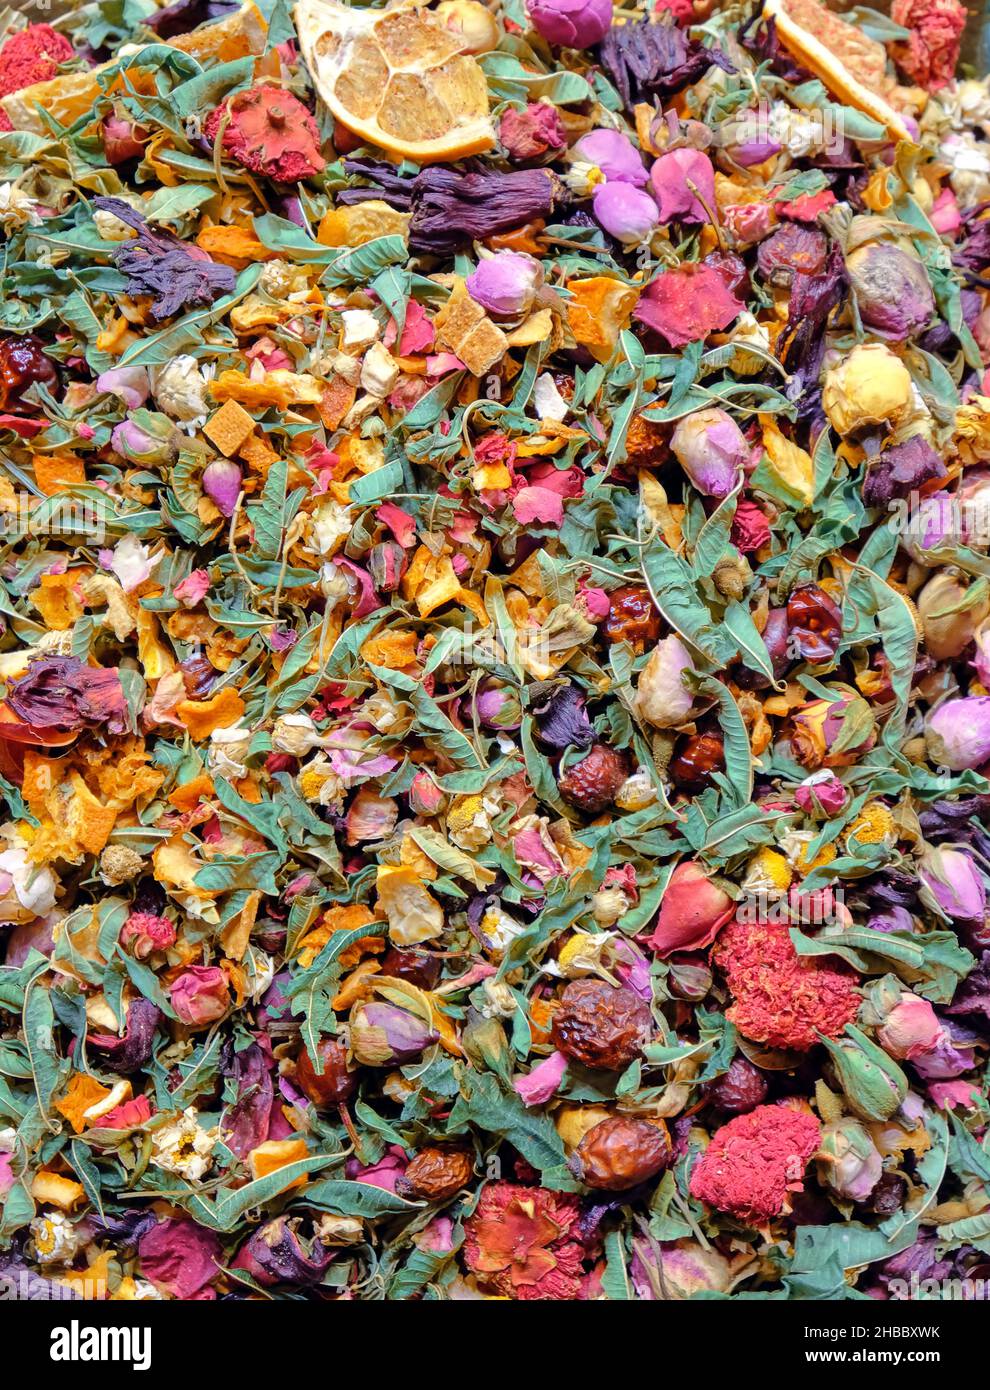 Food background texture of green tea with flower rose petals and fruit pieces, organic healthy herbal leaves, detox tea. Stock Photo